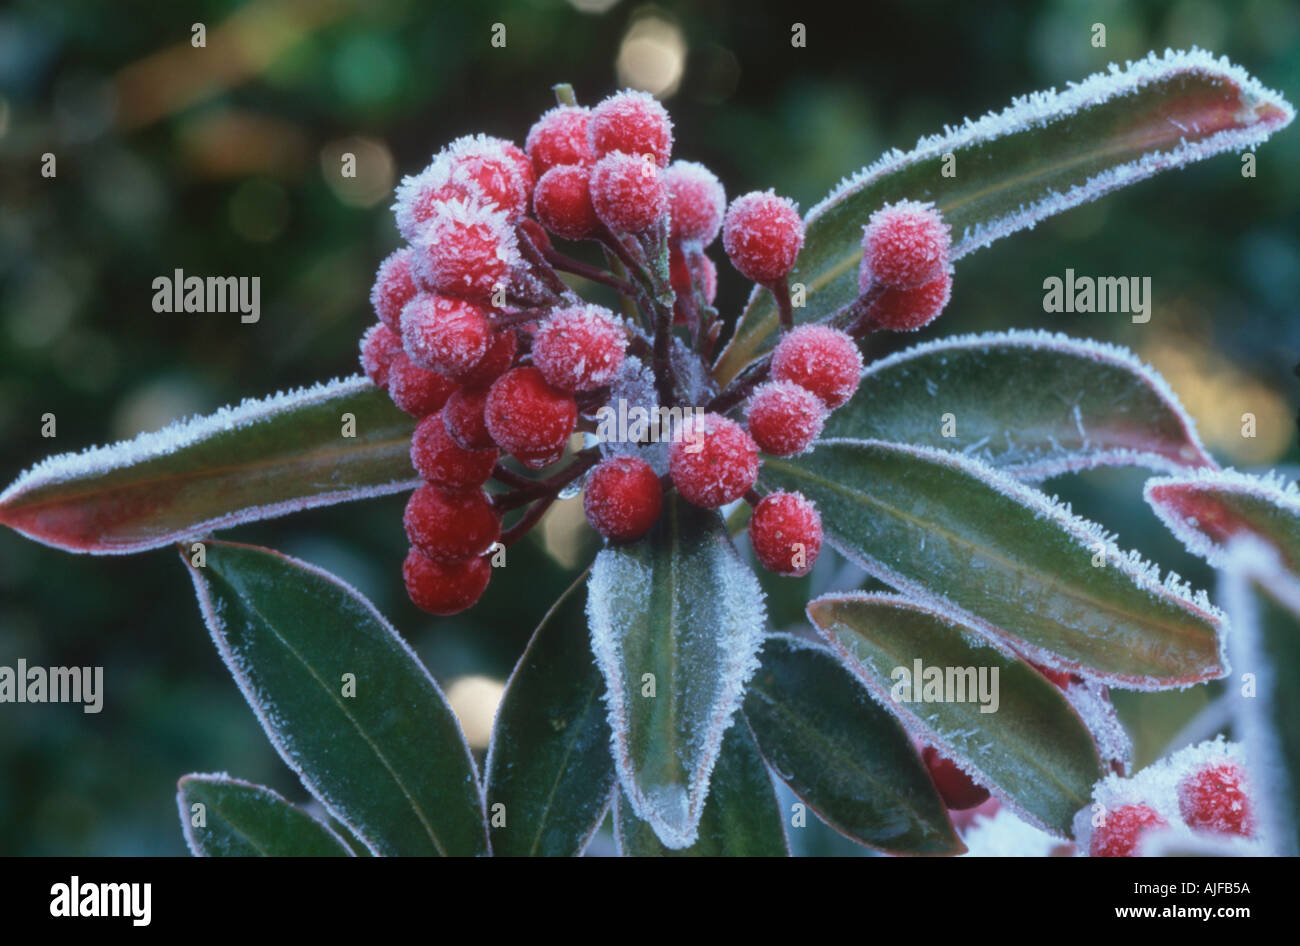 A sprig of Skimmia japonica encrusted with hoar frost The scarlet berries contrast with the green leaves Stock Photo